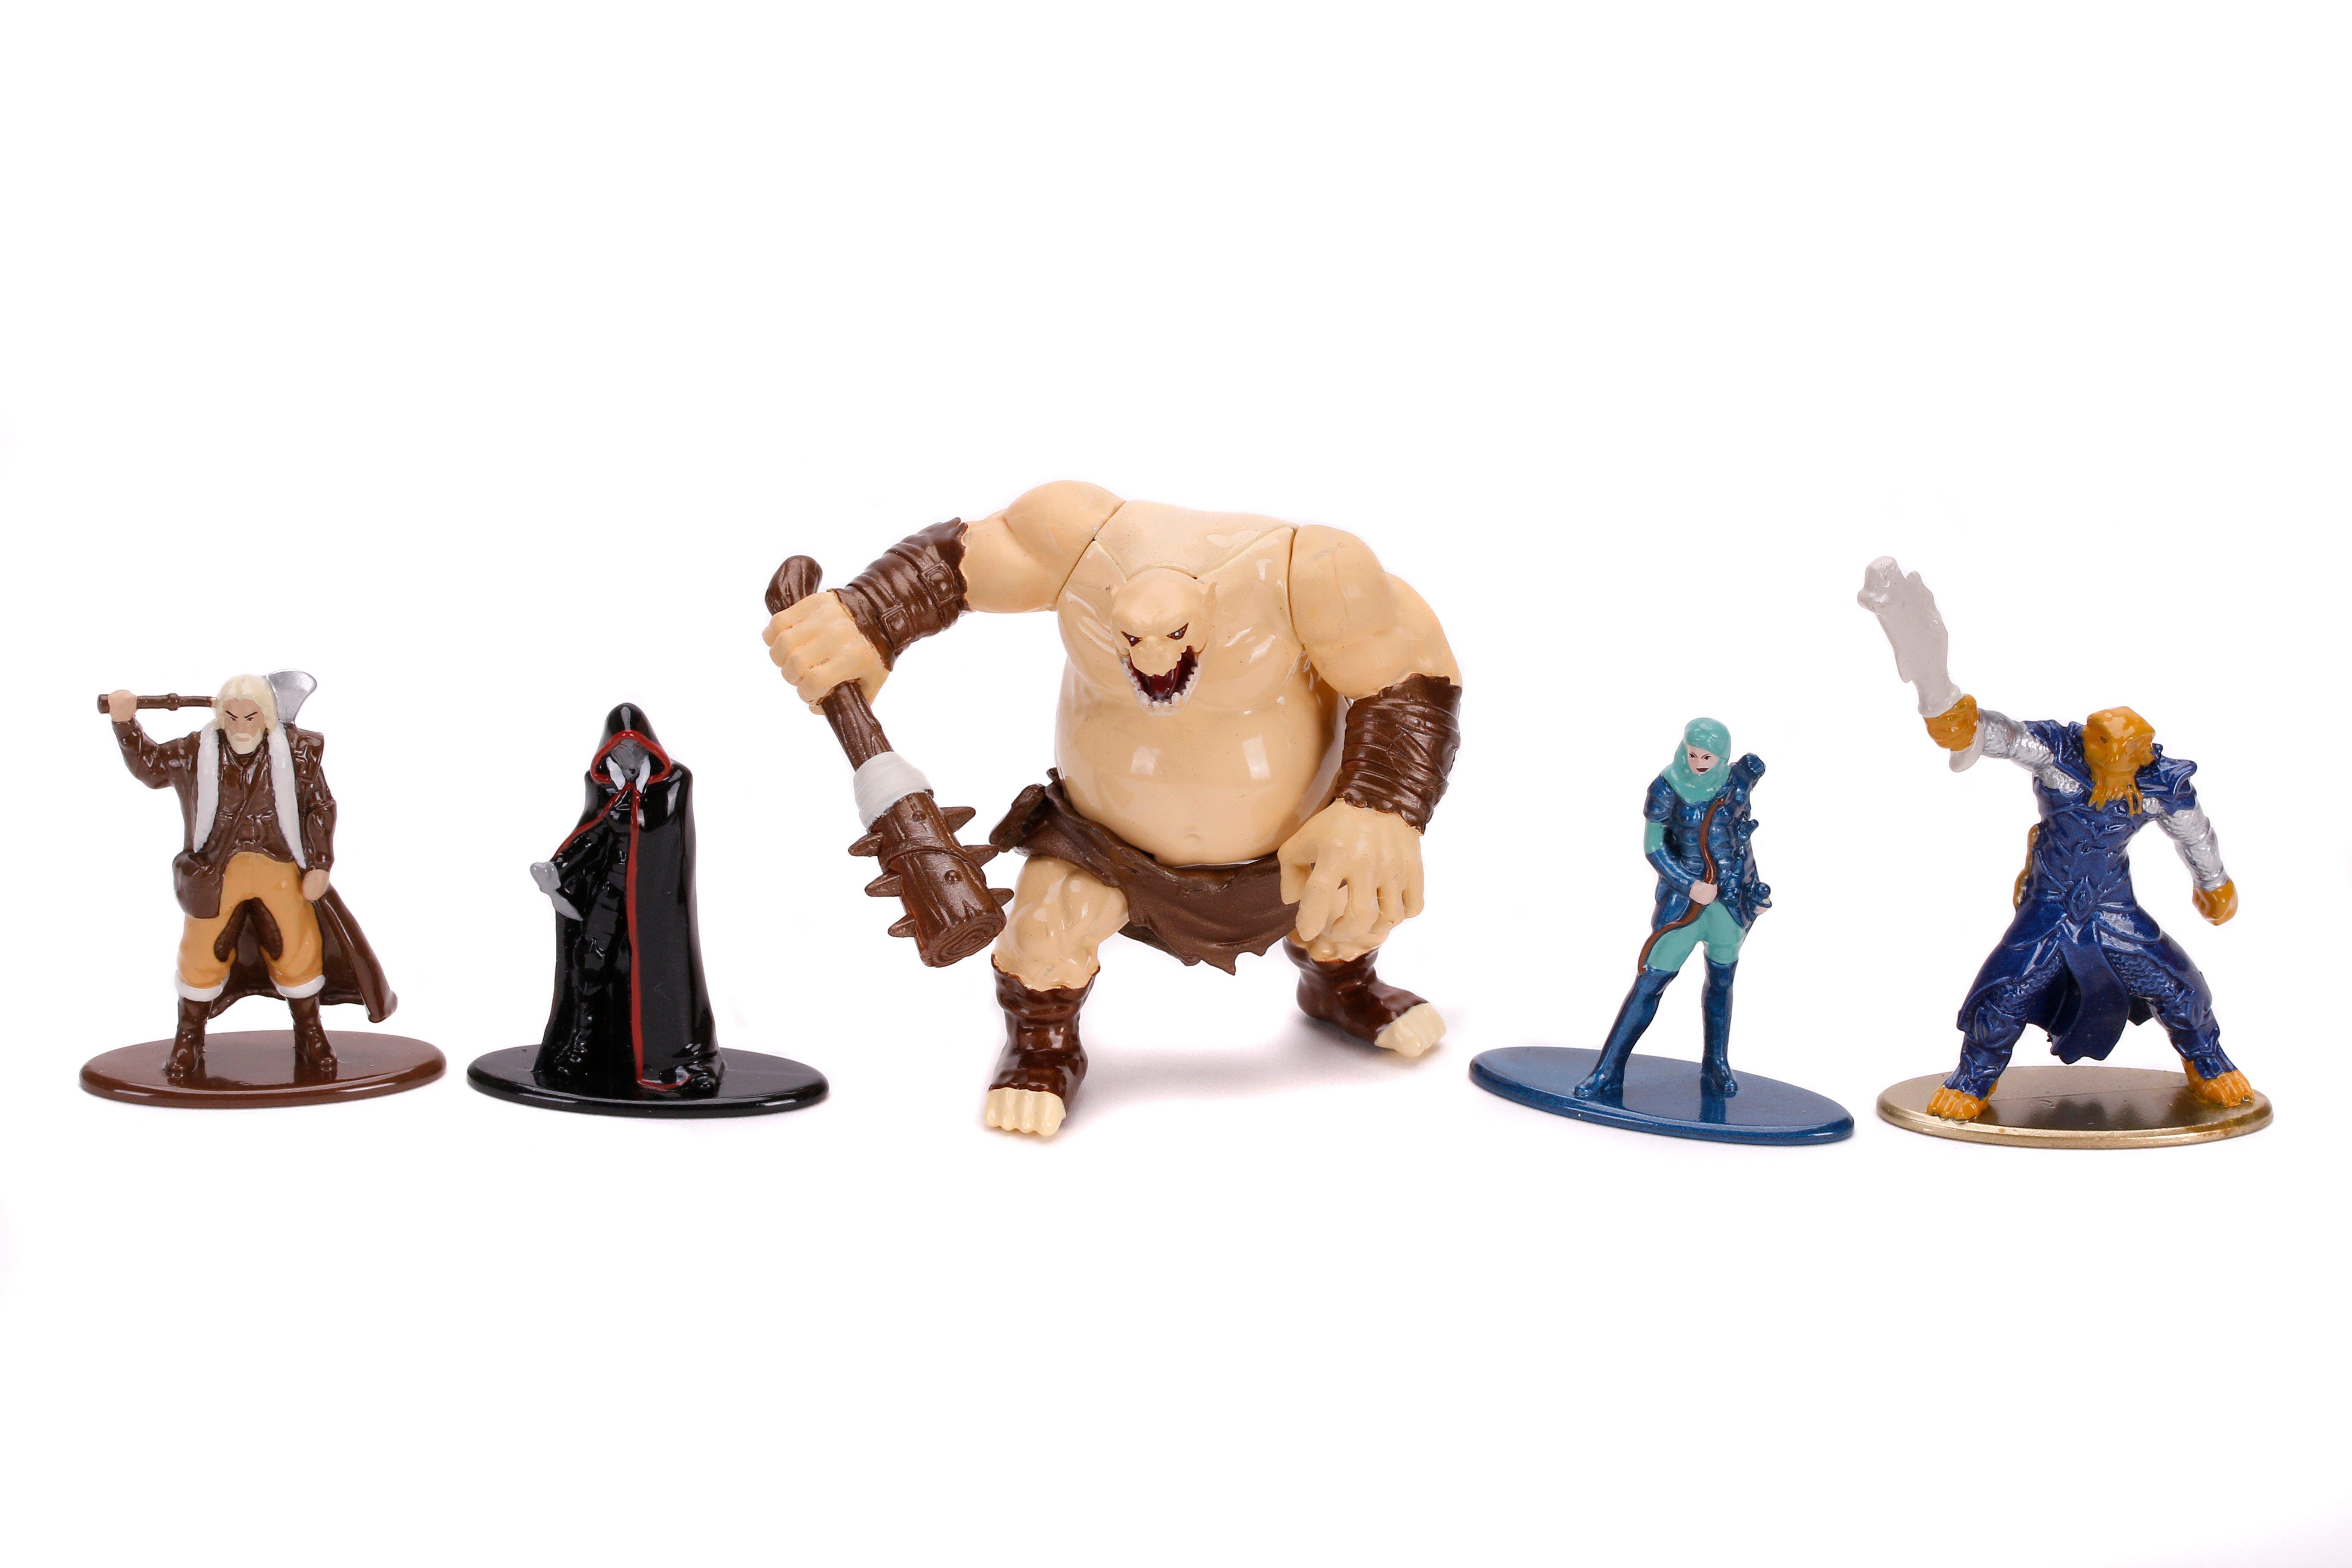 Jada Toys Dungeons & Dragons Diecast Figurines Sets for sale online 